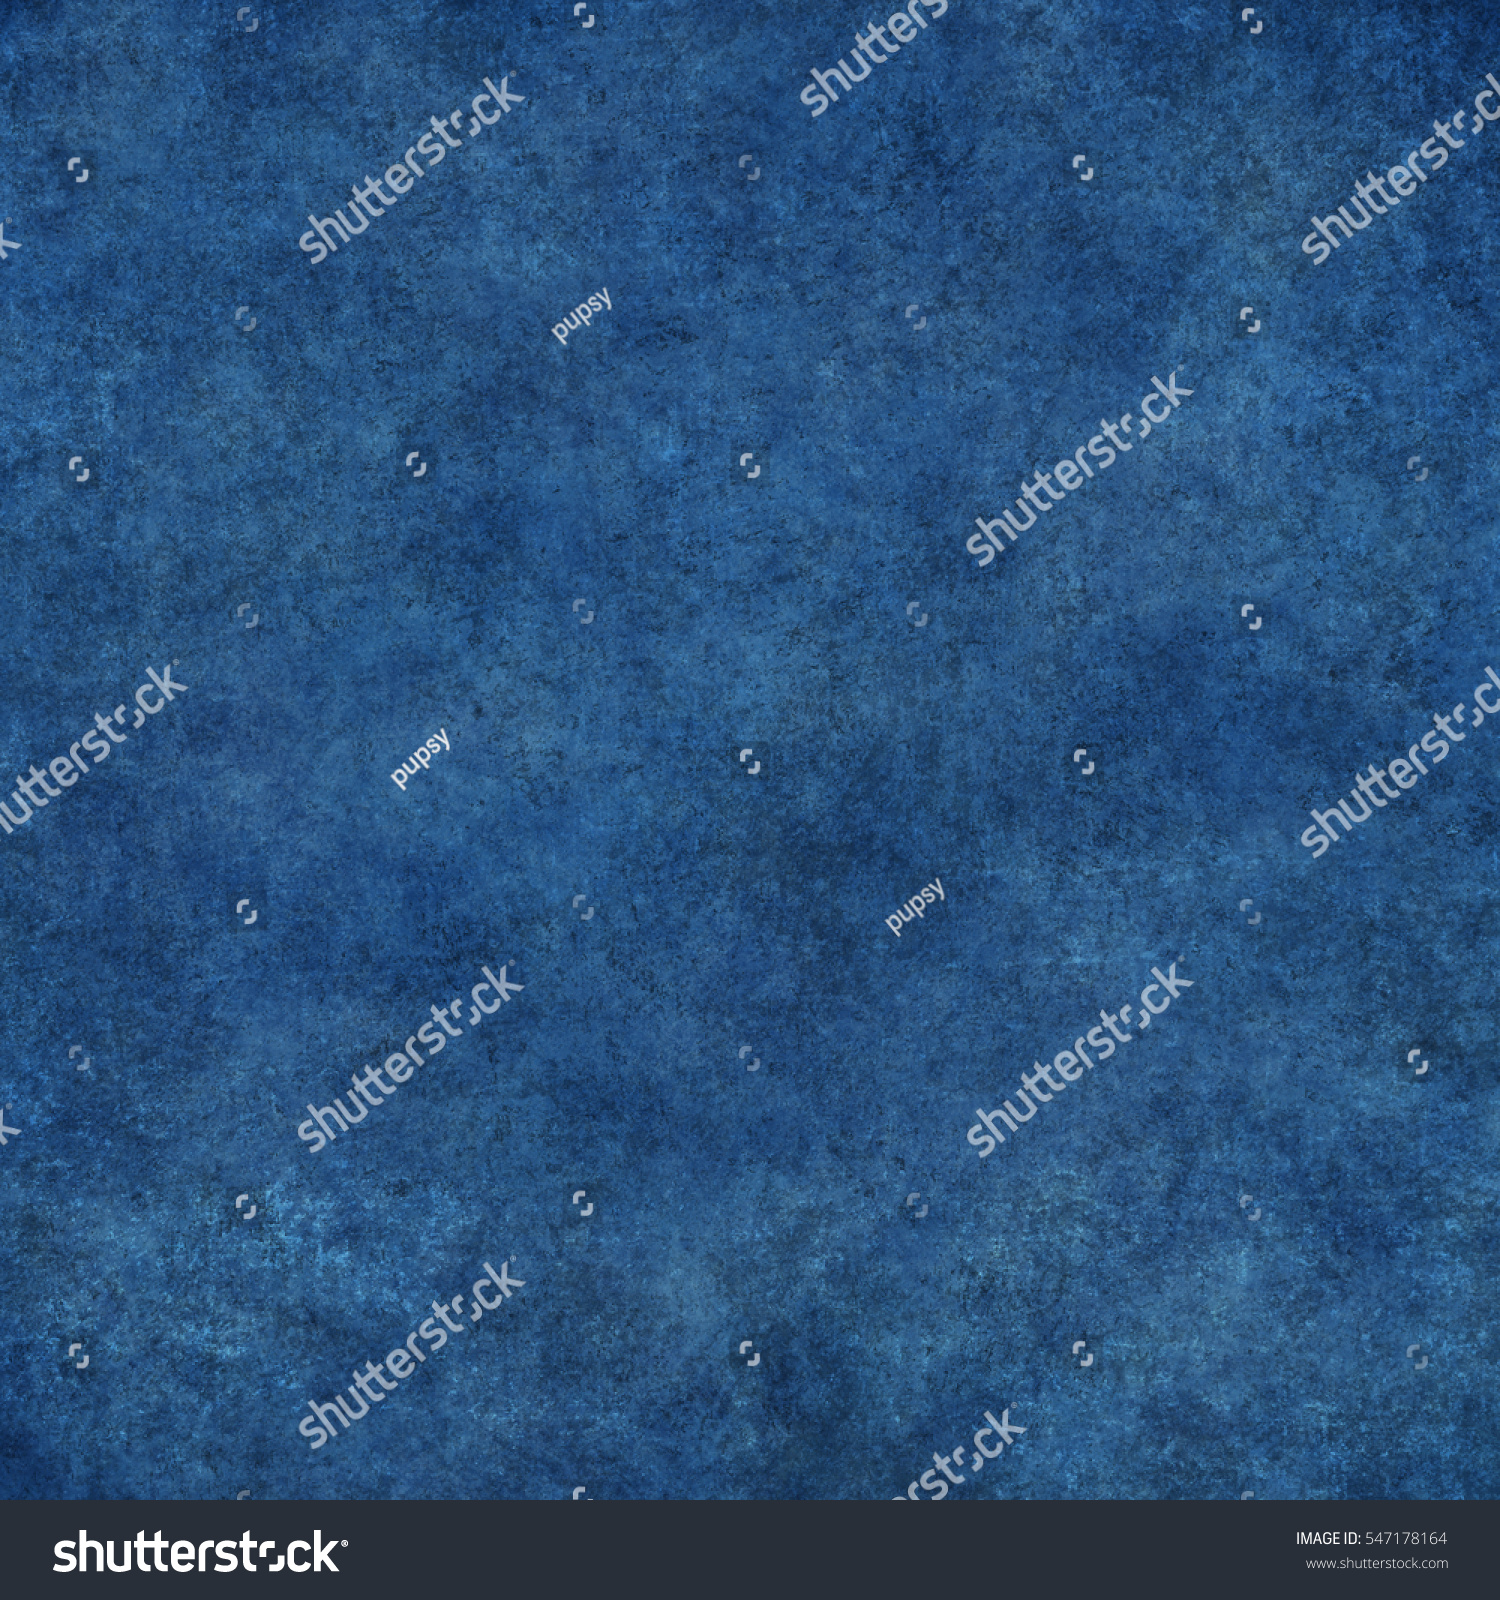 Blue designed grunge texture. Vintage background with space for text or image #547178164